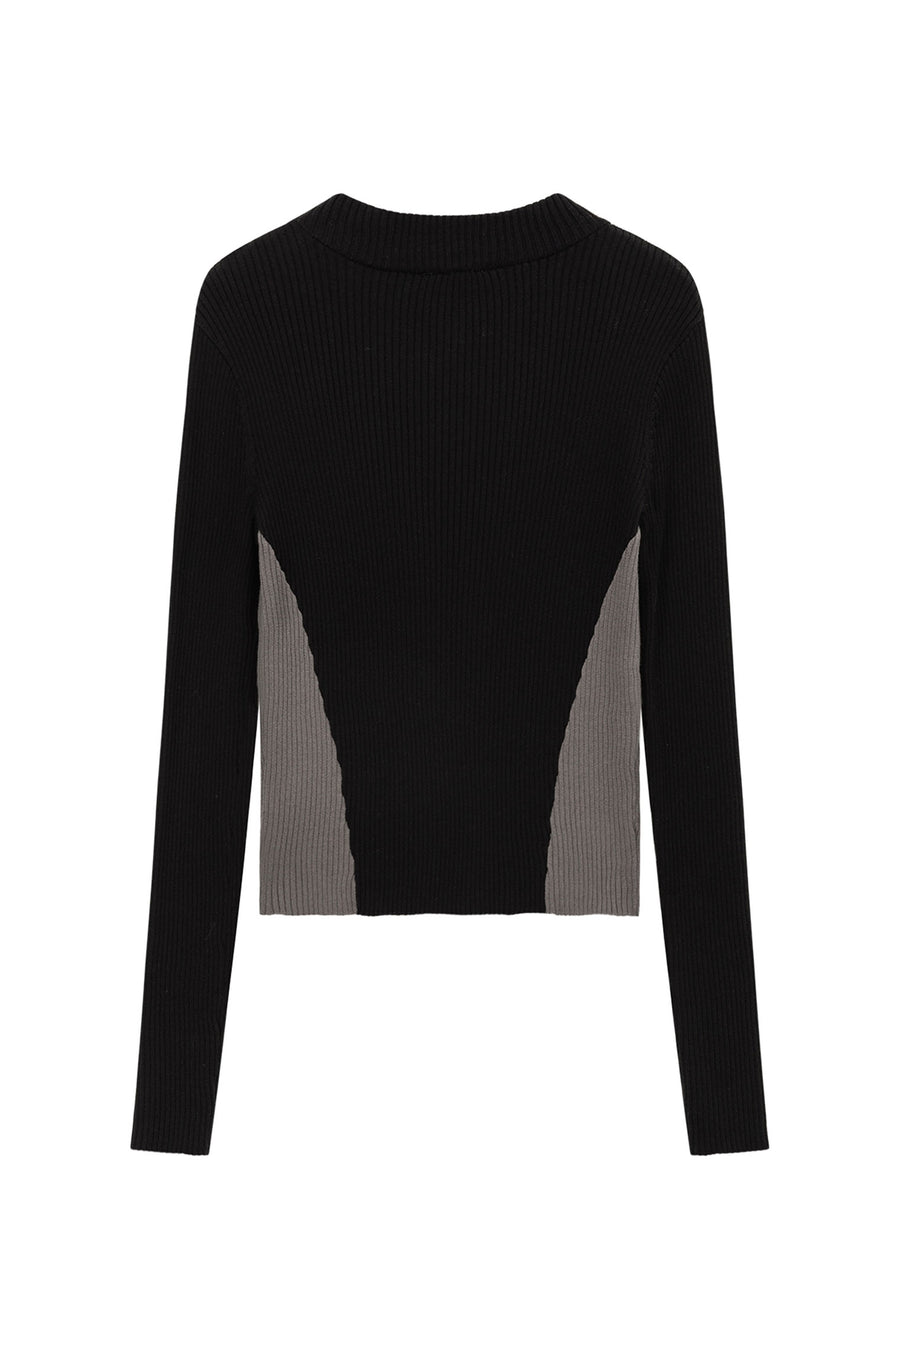 Two Toned Slim Knit Sweater